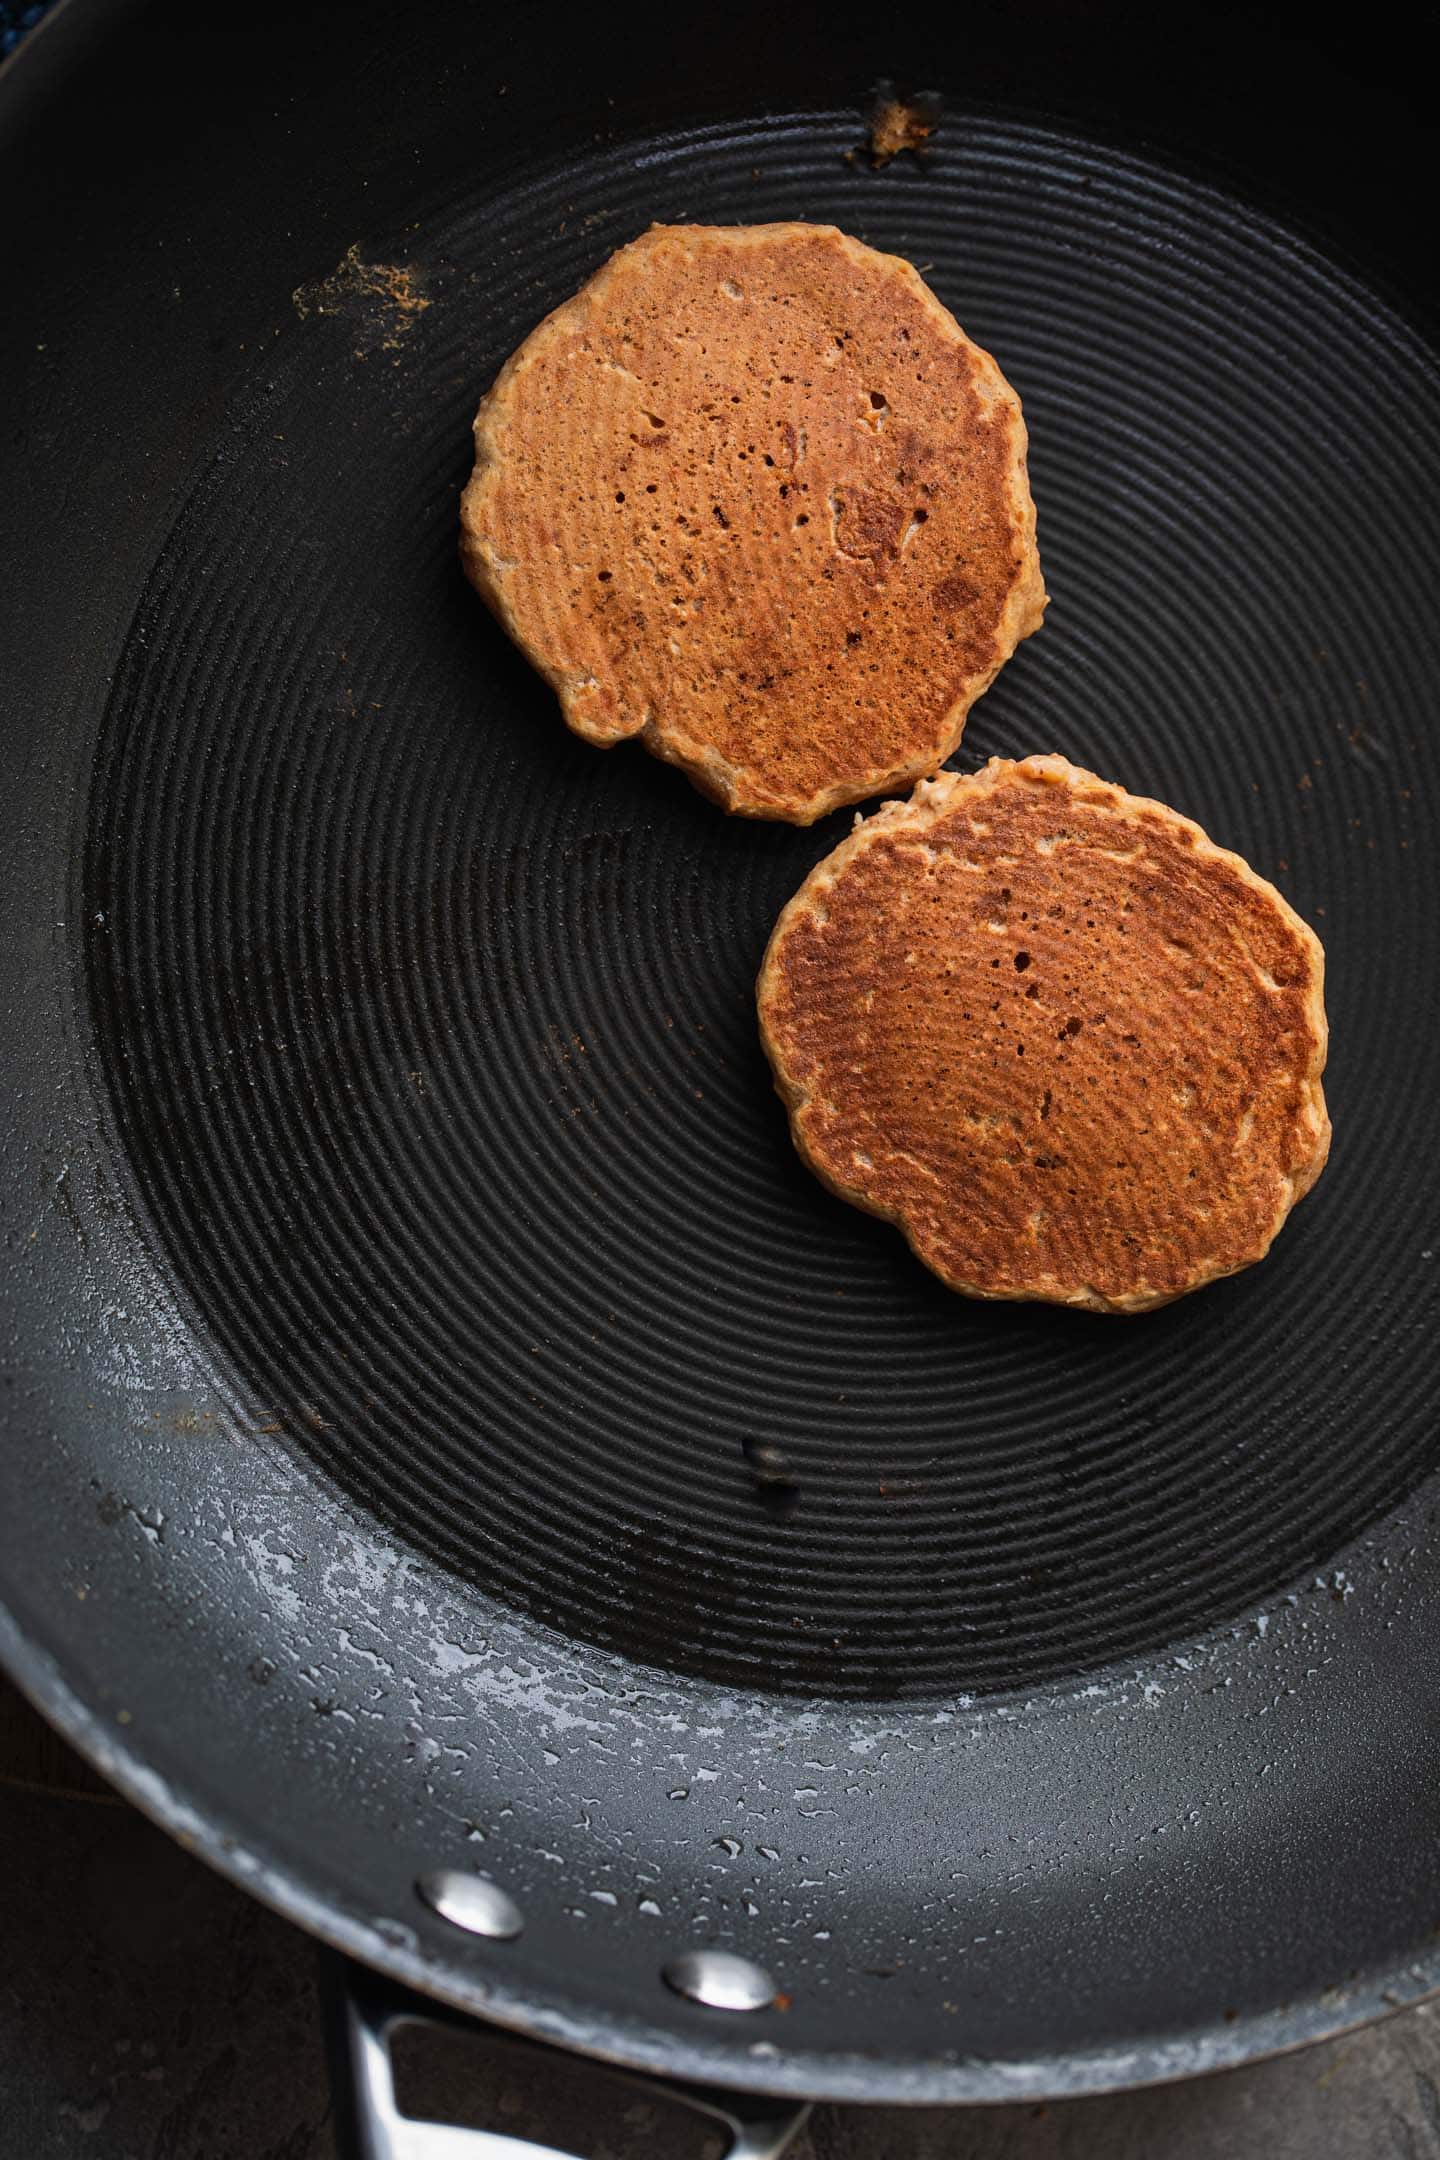 Cooked pancakes in a frying pan